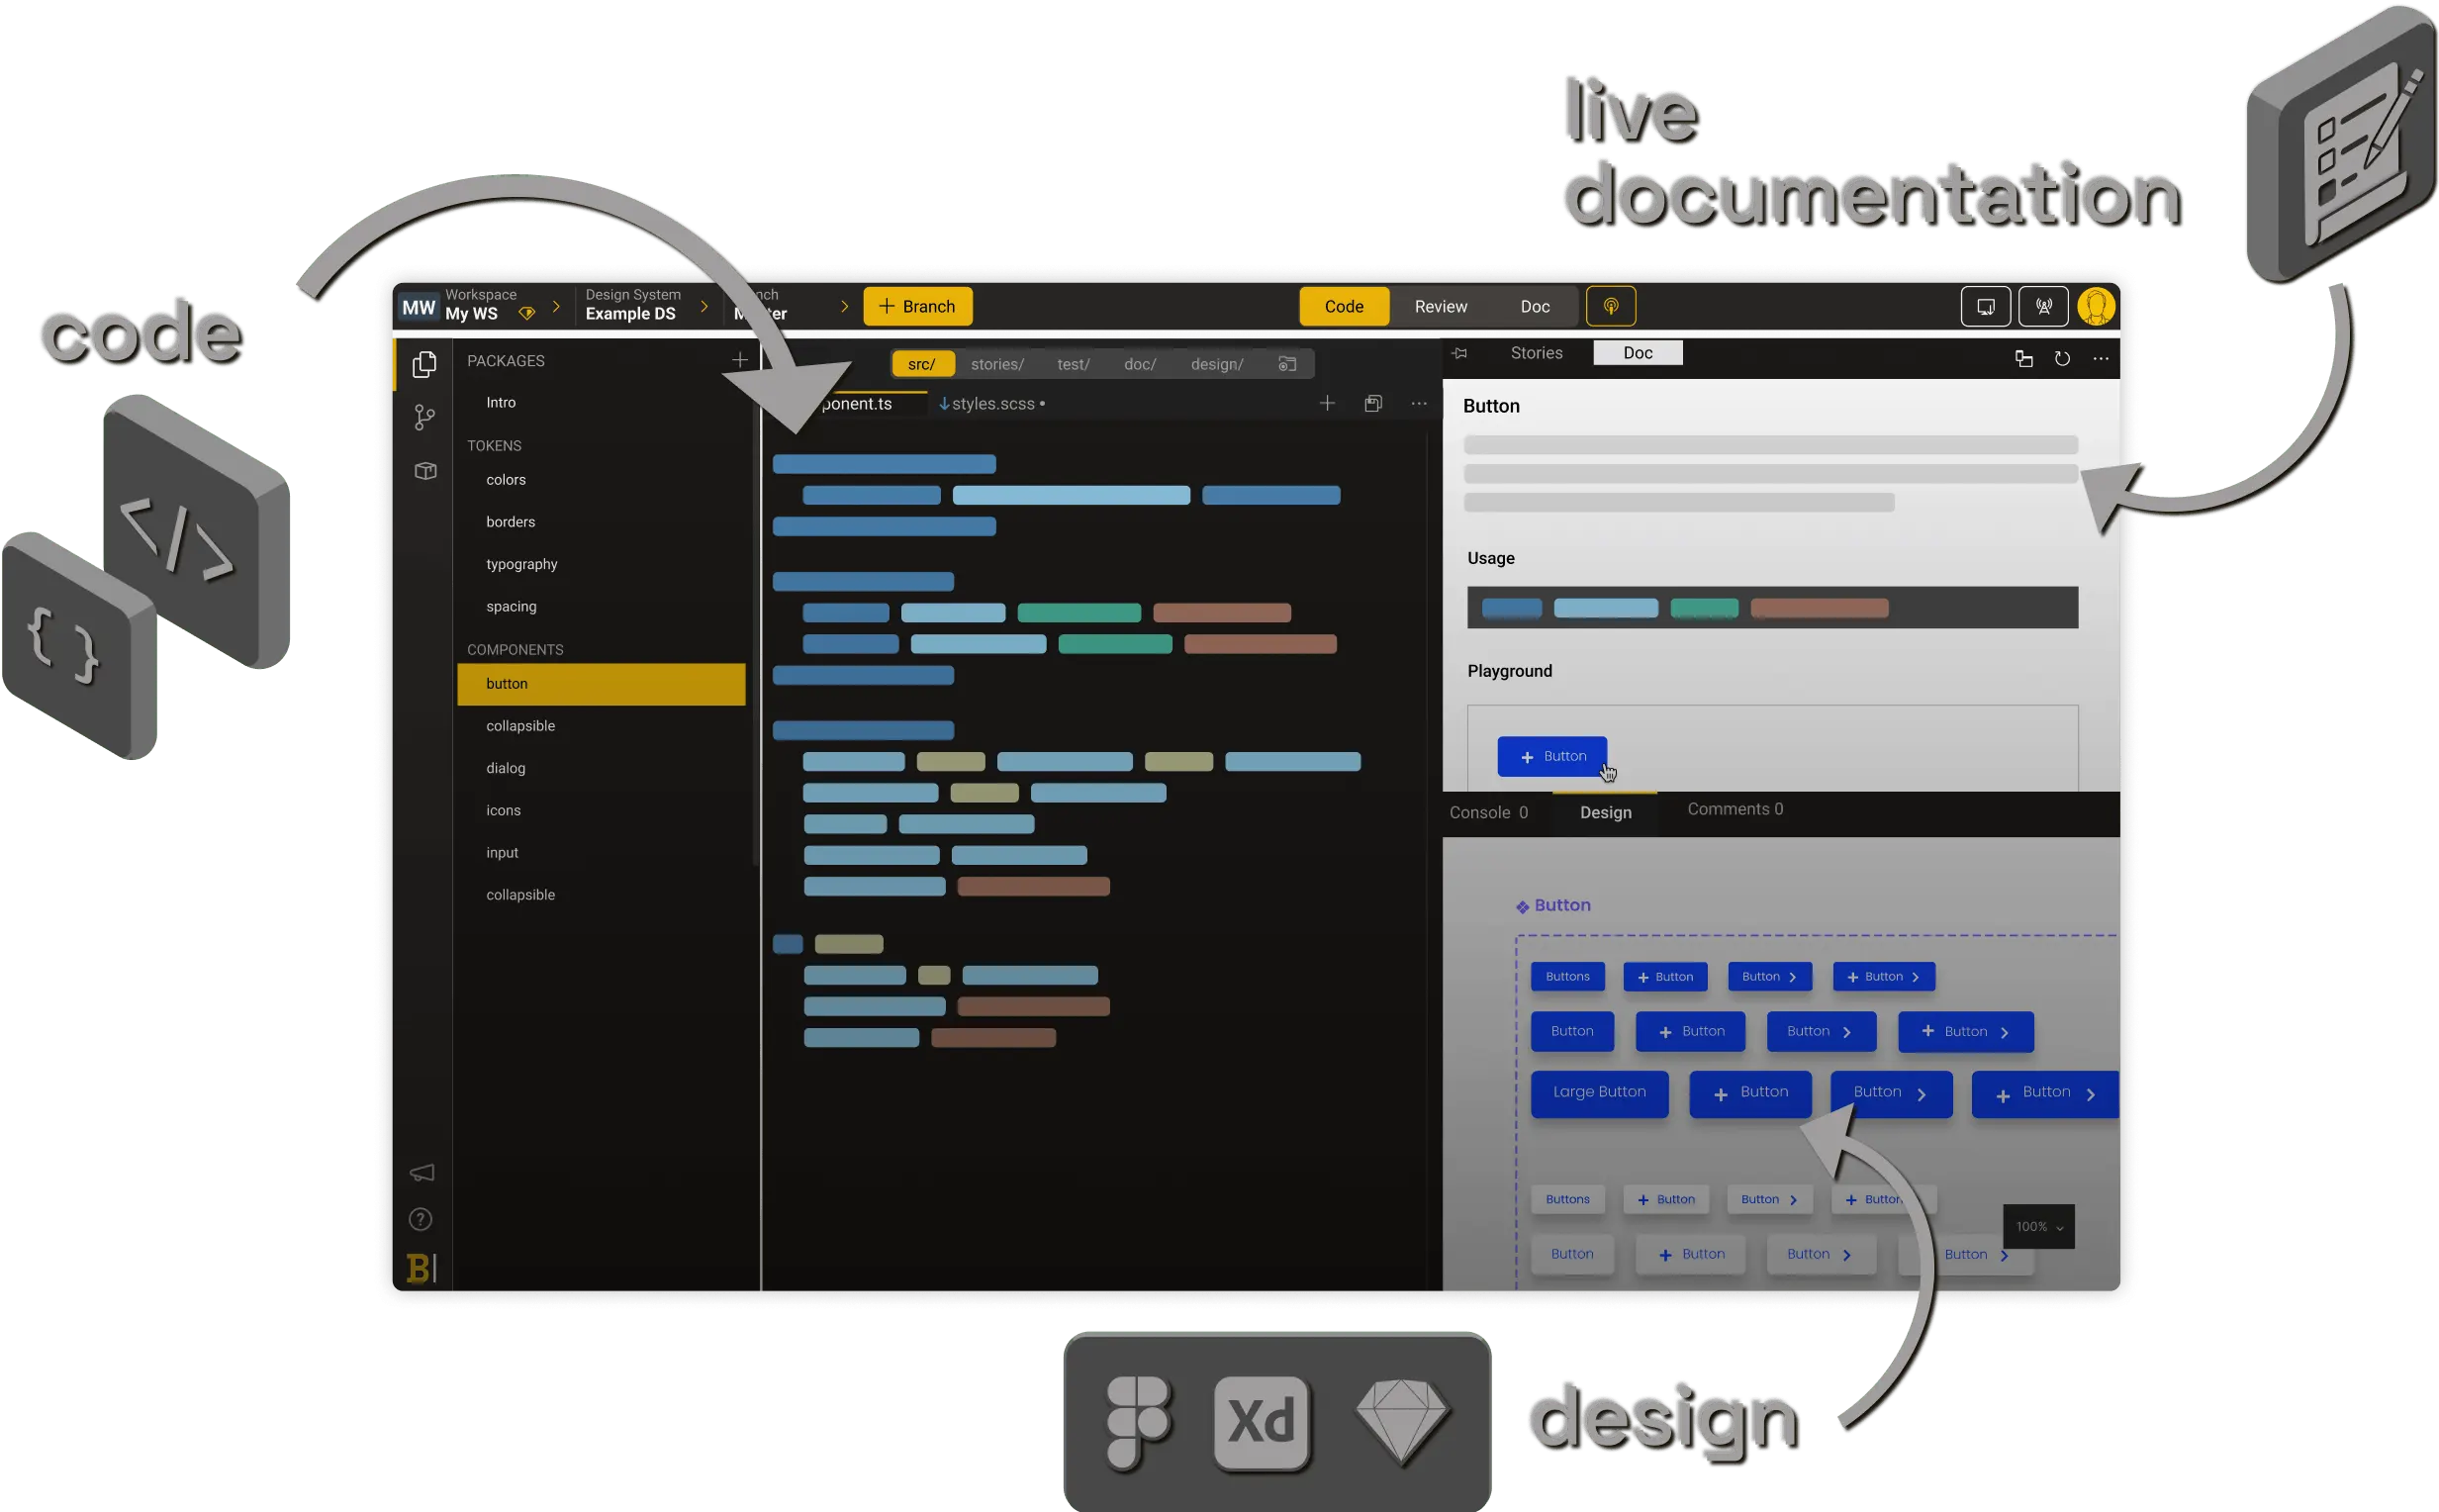 Screenshot of Backlight showing the different sections: code, live documentation and design